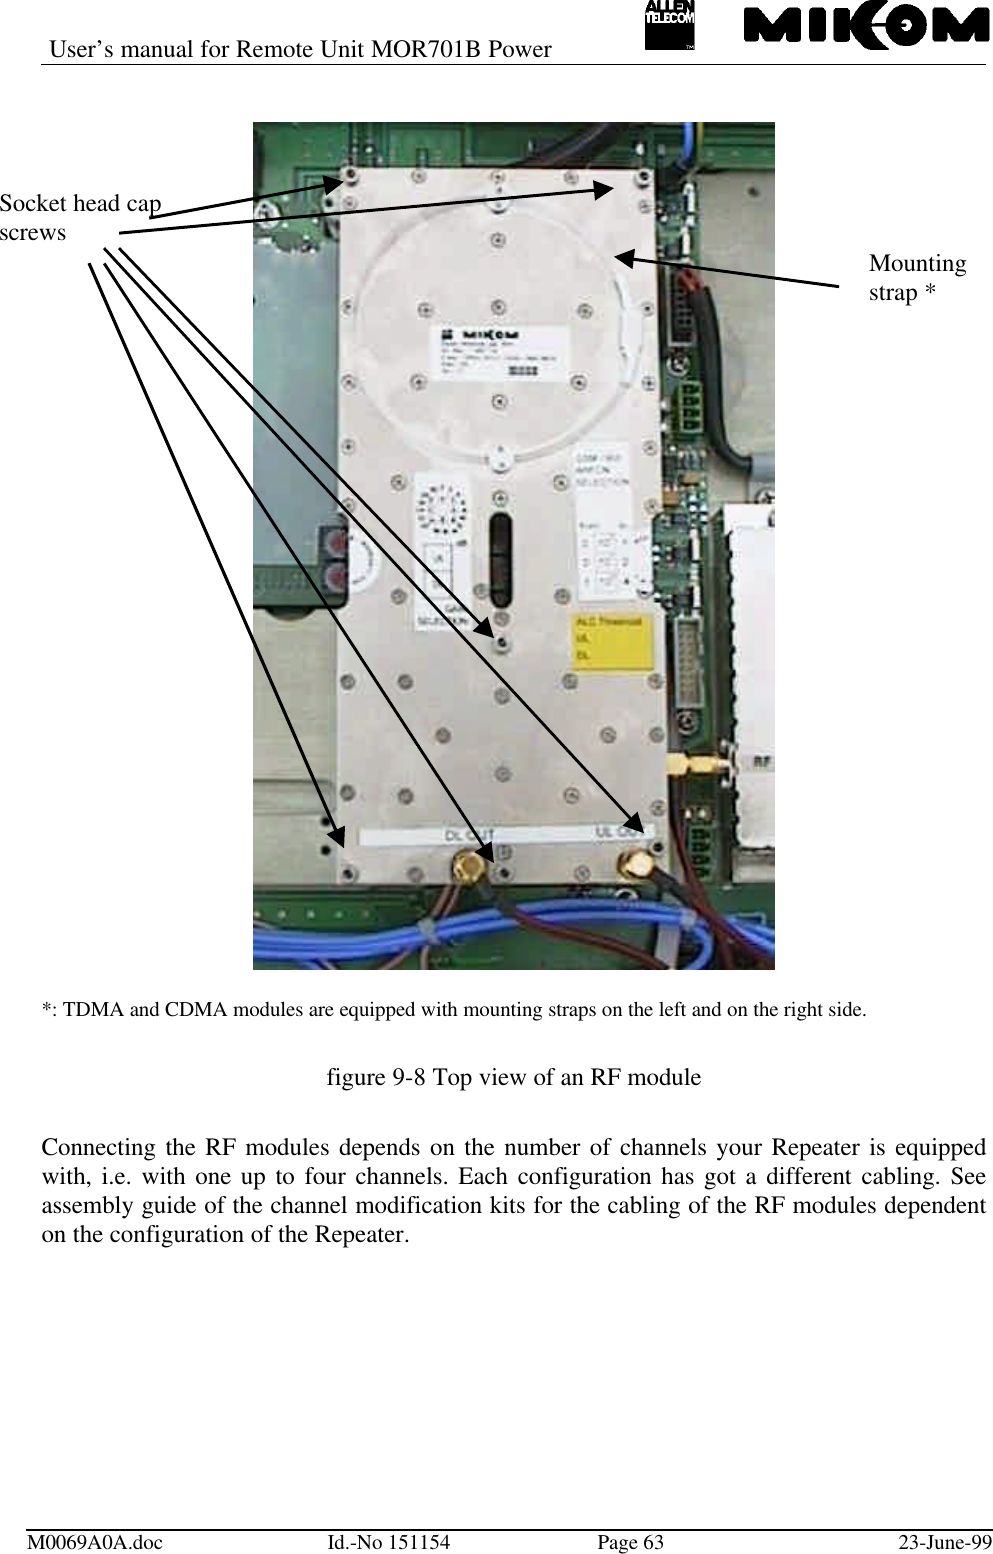 User’s manual for Remote Unit MOR701B PowerM0069A0A.doc Id.-No 151154 Page 63 23-June-99*: TDMA and CDMA modules are equipped with mounting straps on the left and on the right side.figure 9-8 Top view of an RF moduleConnecting the RF modules depends on the number of channels your Repeater is equippedwith, i.e. with one up to four channels. Each configuration has got a different cabling. Seeassembly guide of the channel modification kits for the cabling of the RF modules dependenton the configuration of the Repeater.Mountingstrap *Socket head capscrews